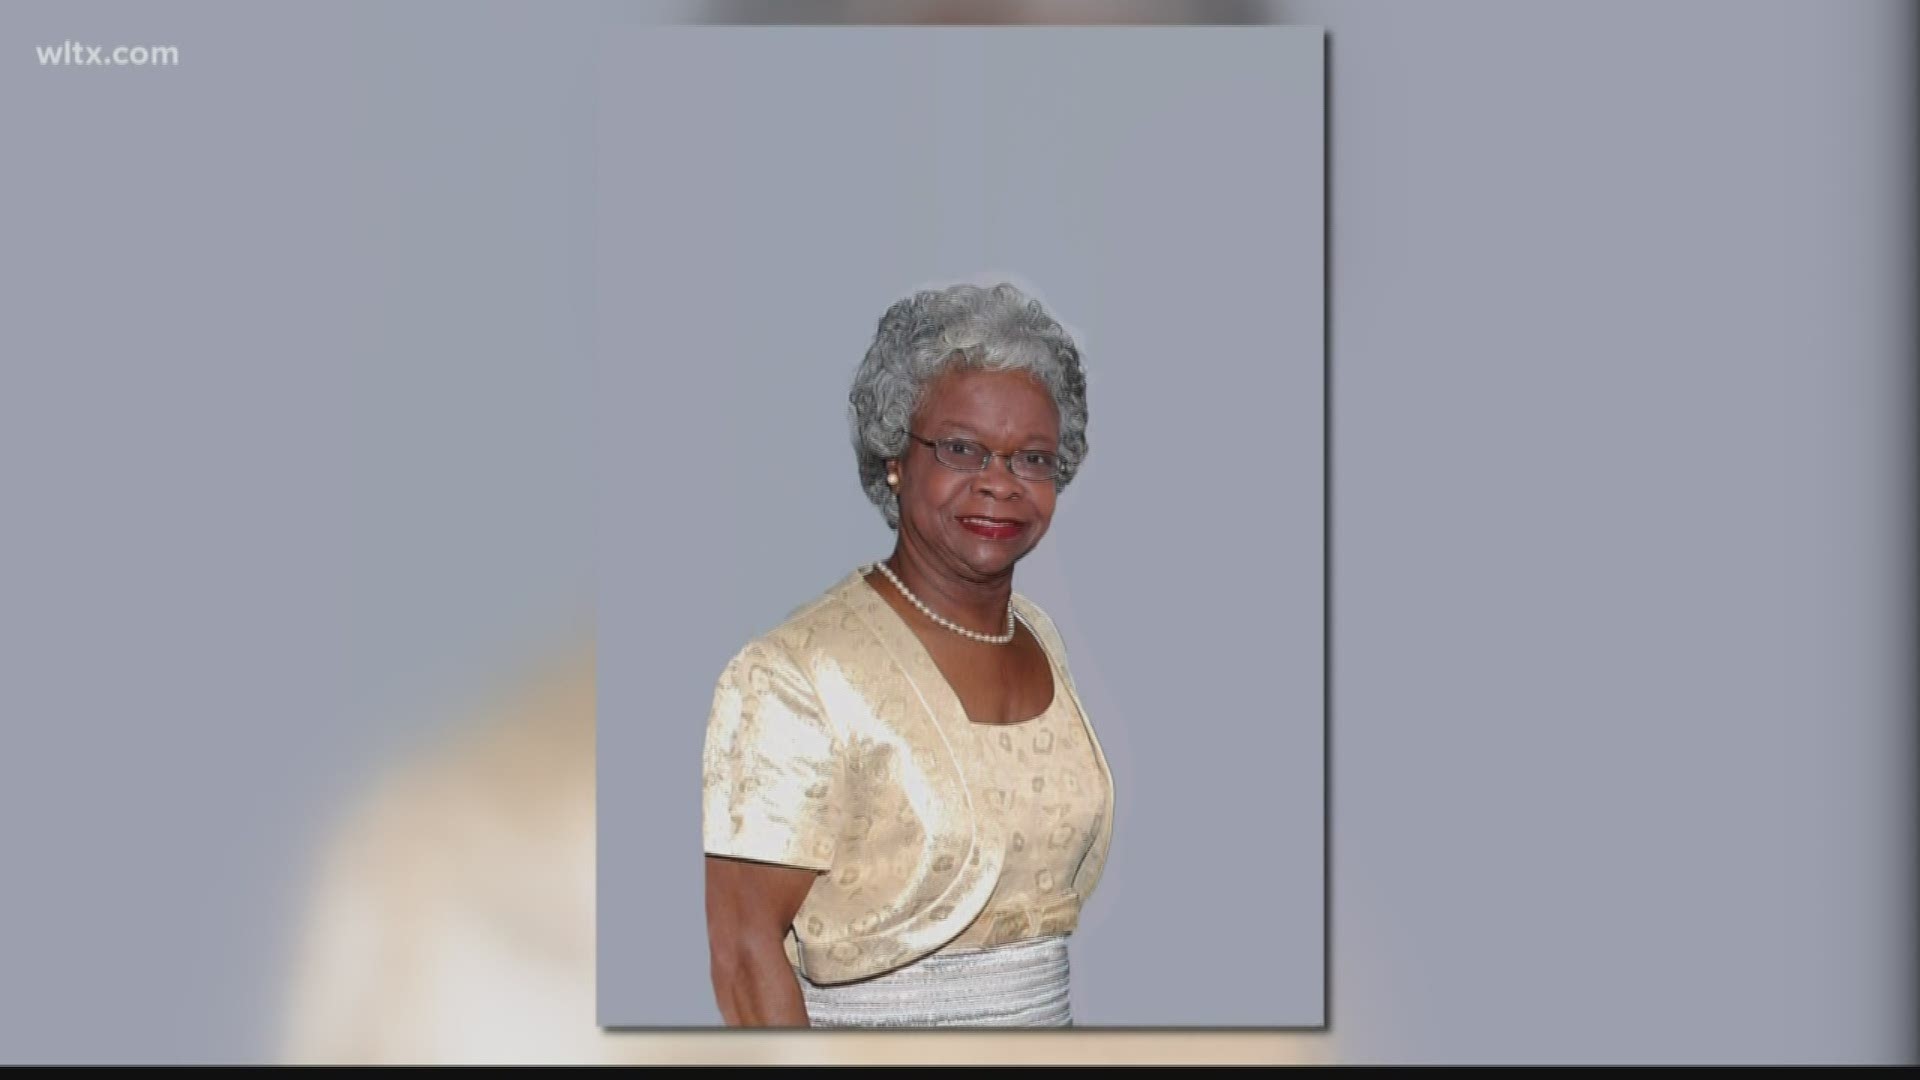 Dr. Emily England Clyburn, the wife of South Carolina Congressman James Clyburn and a librarian and philanthropist, has passed away. She was 80 years old.